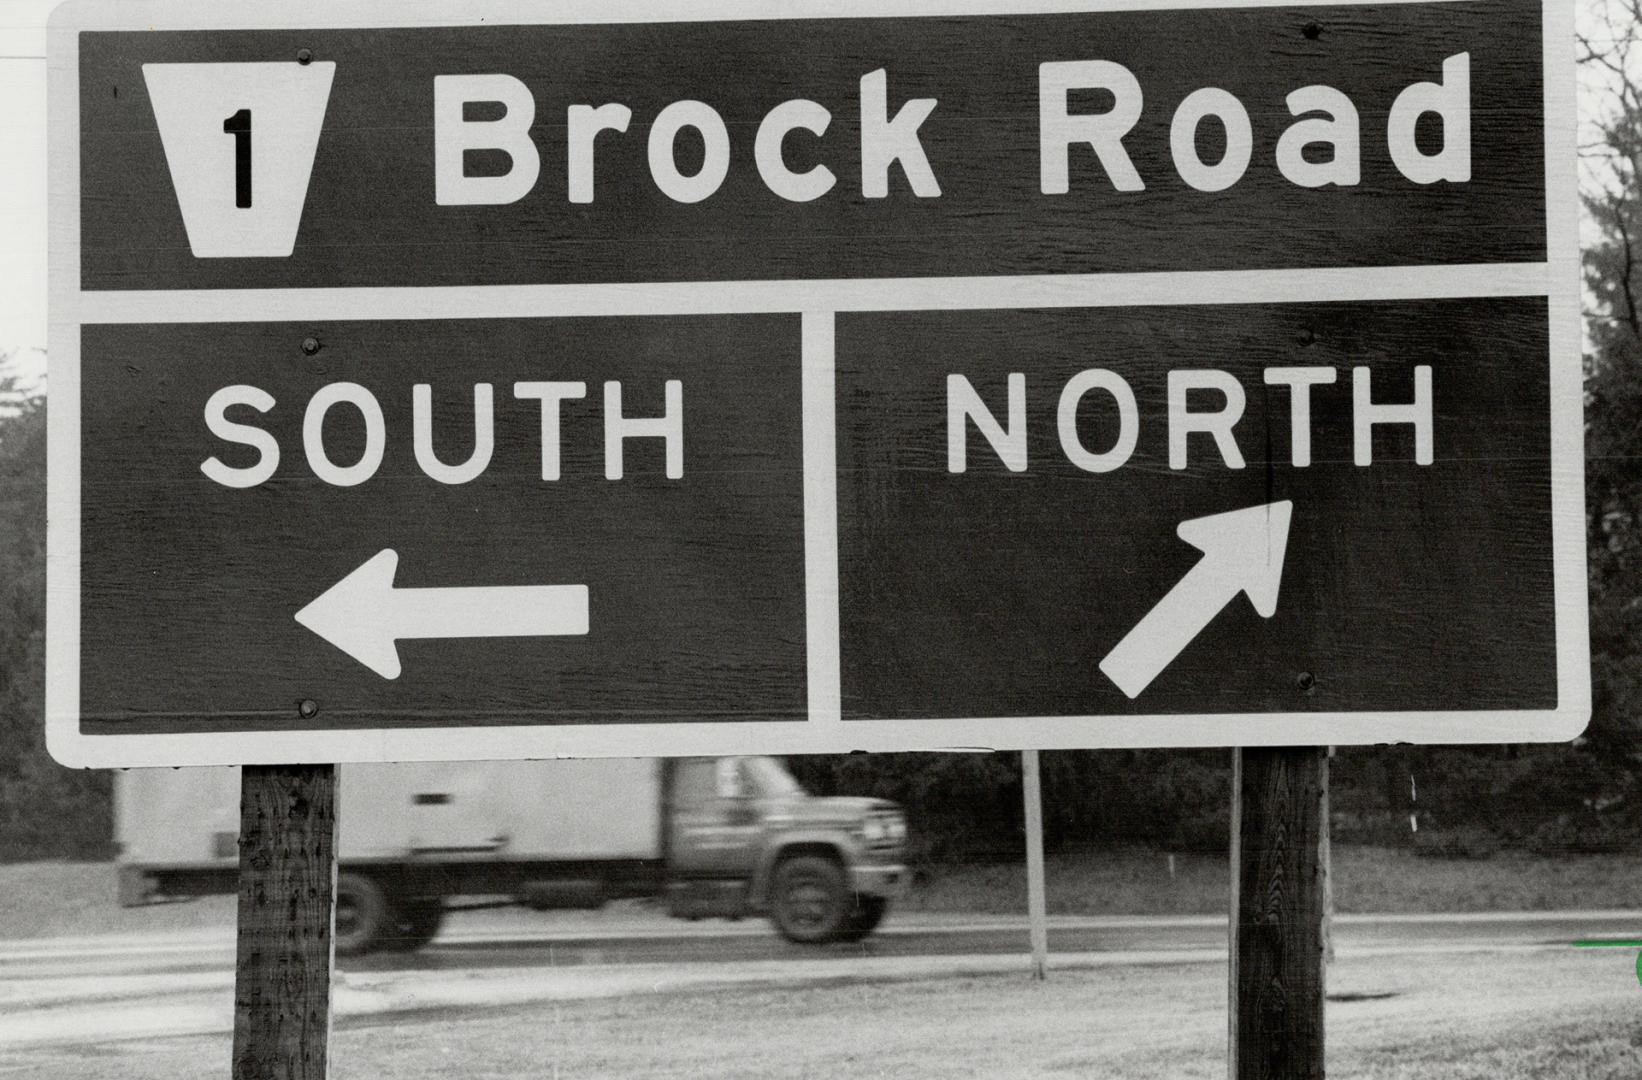 Brock Rd. is often confused with Brock St. in Whitby